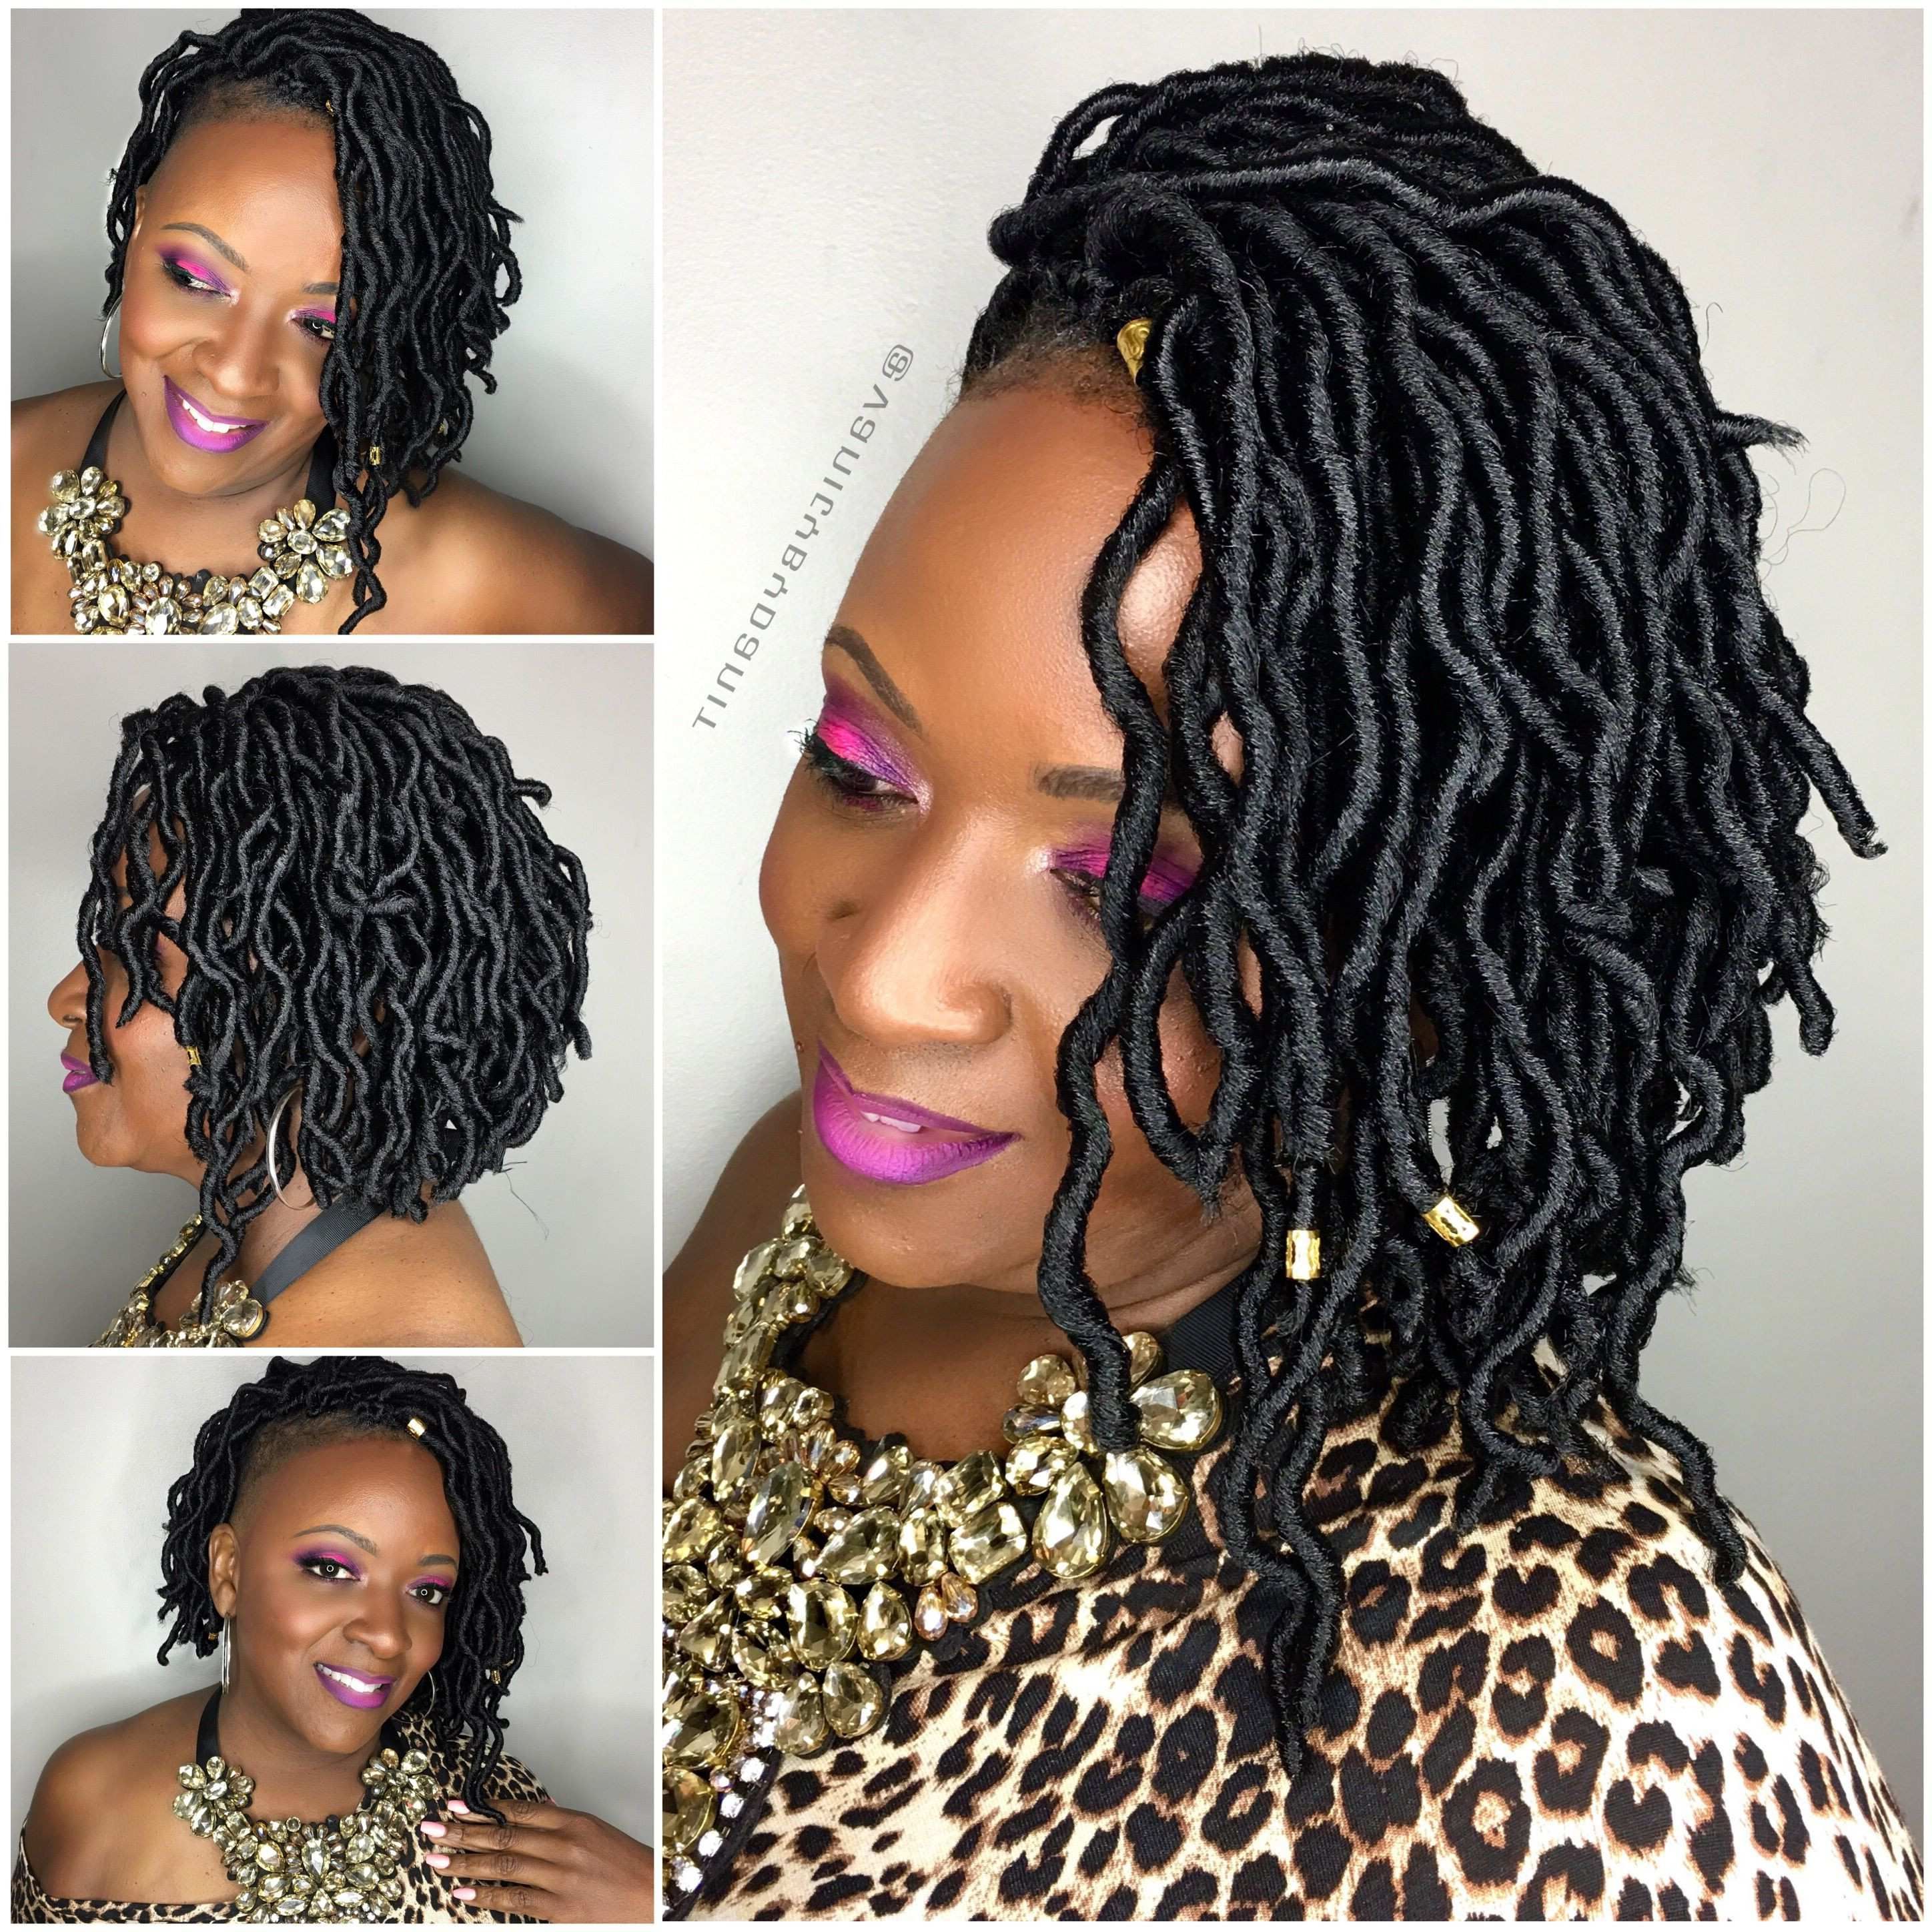 2019 Crochet Mohawk Twists Micro Braid Hairstyles Pertaining To Remarkable Fresh Crochet Braids With Shaved Sides (View 18 of 20)